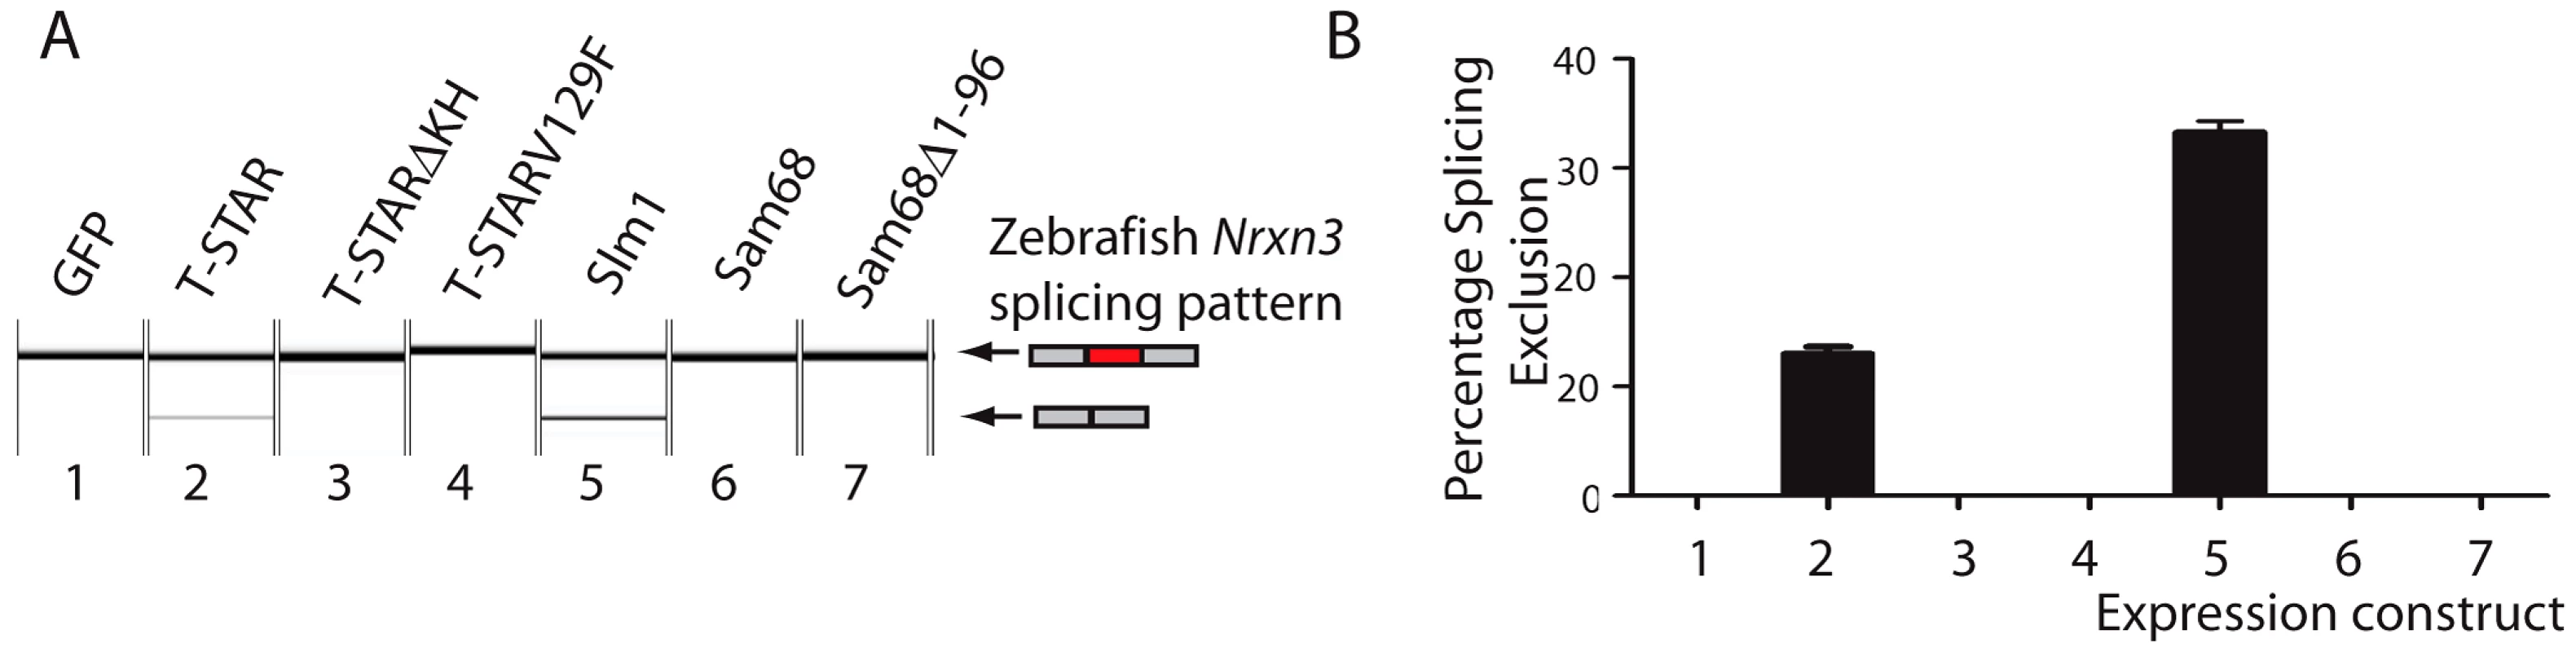 Human T-STAR protein represses splicing inclusion of the Zebrafish <i>Nrxn3</i> AS4 exon.